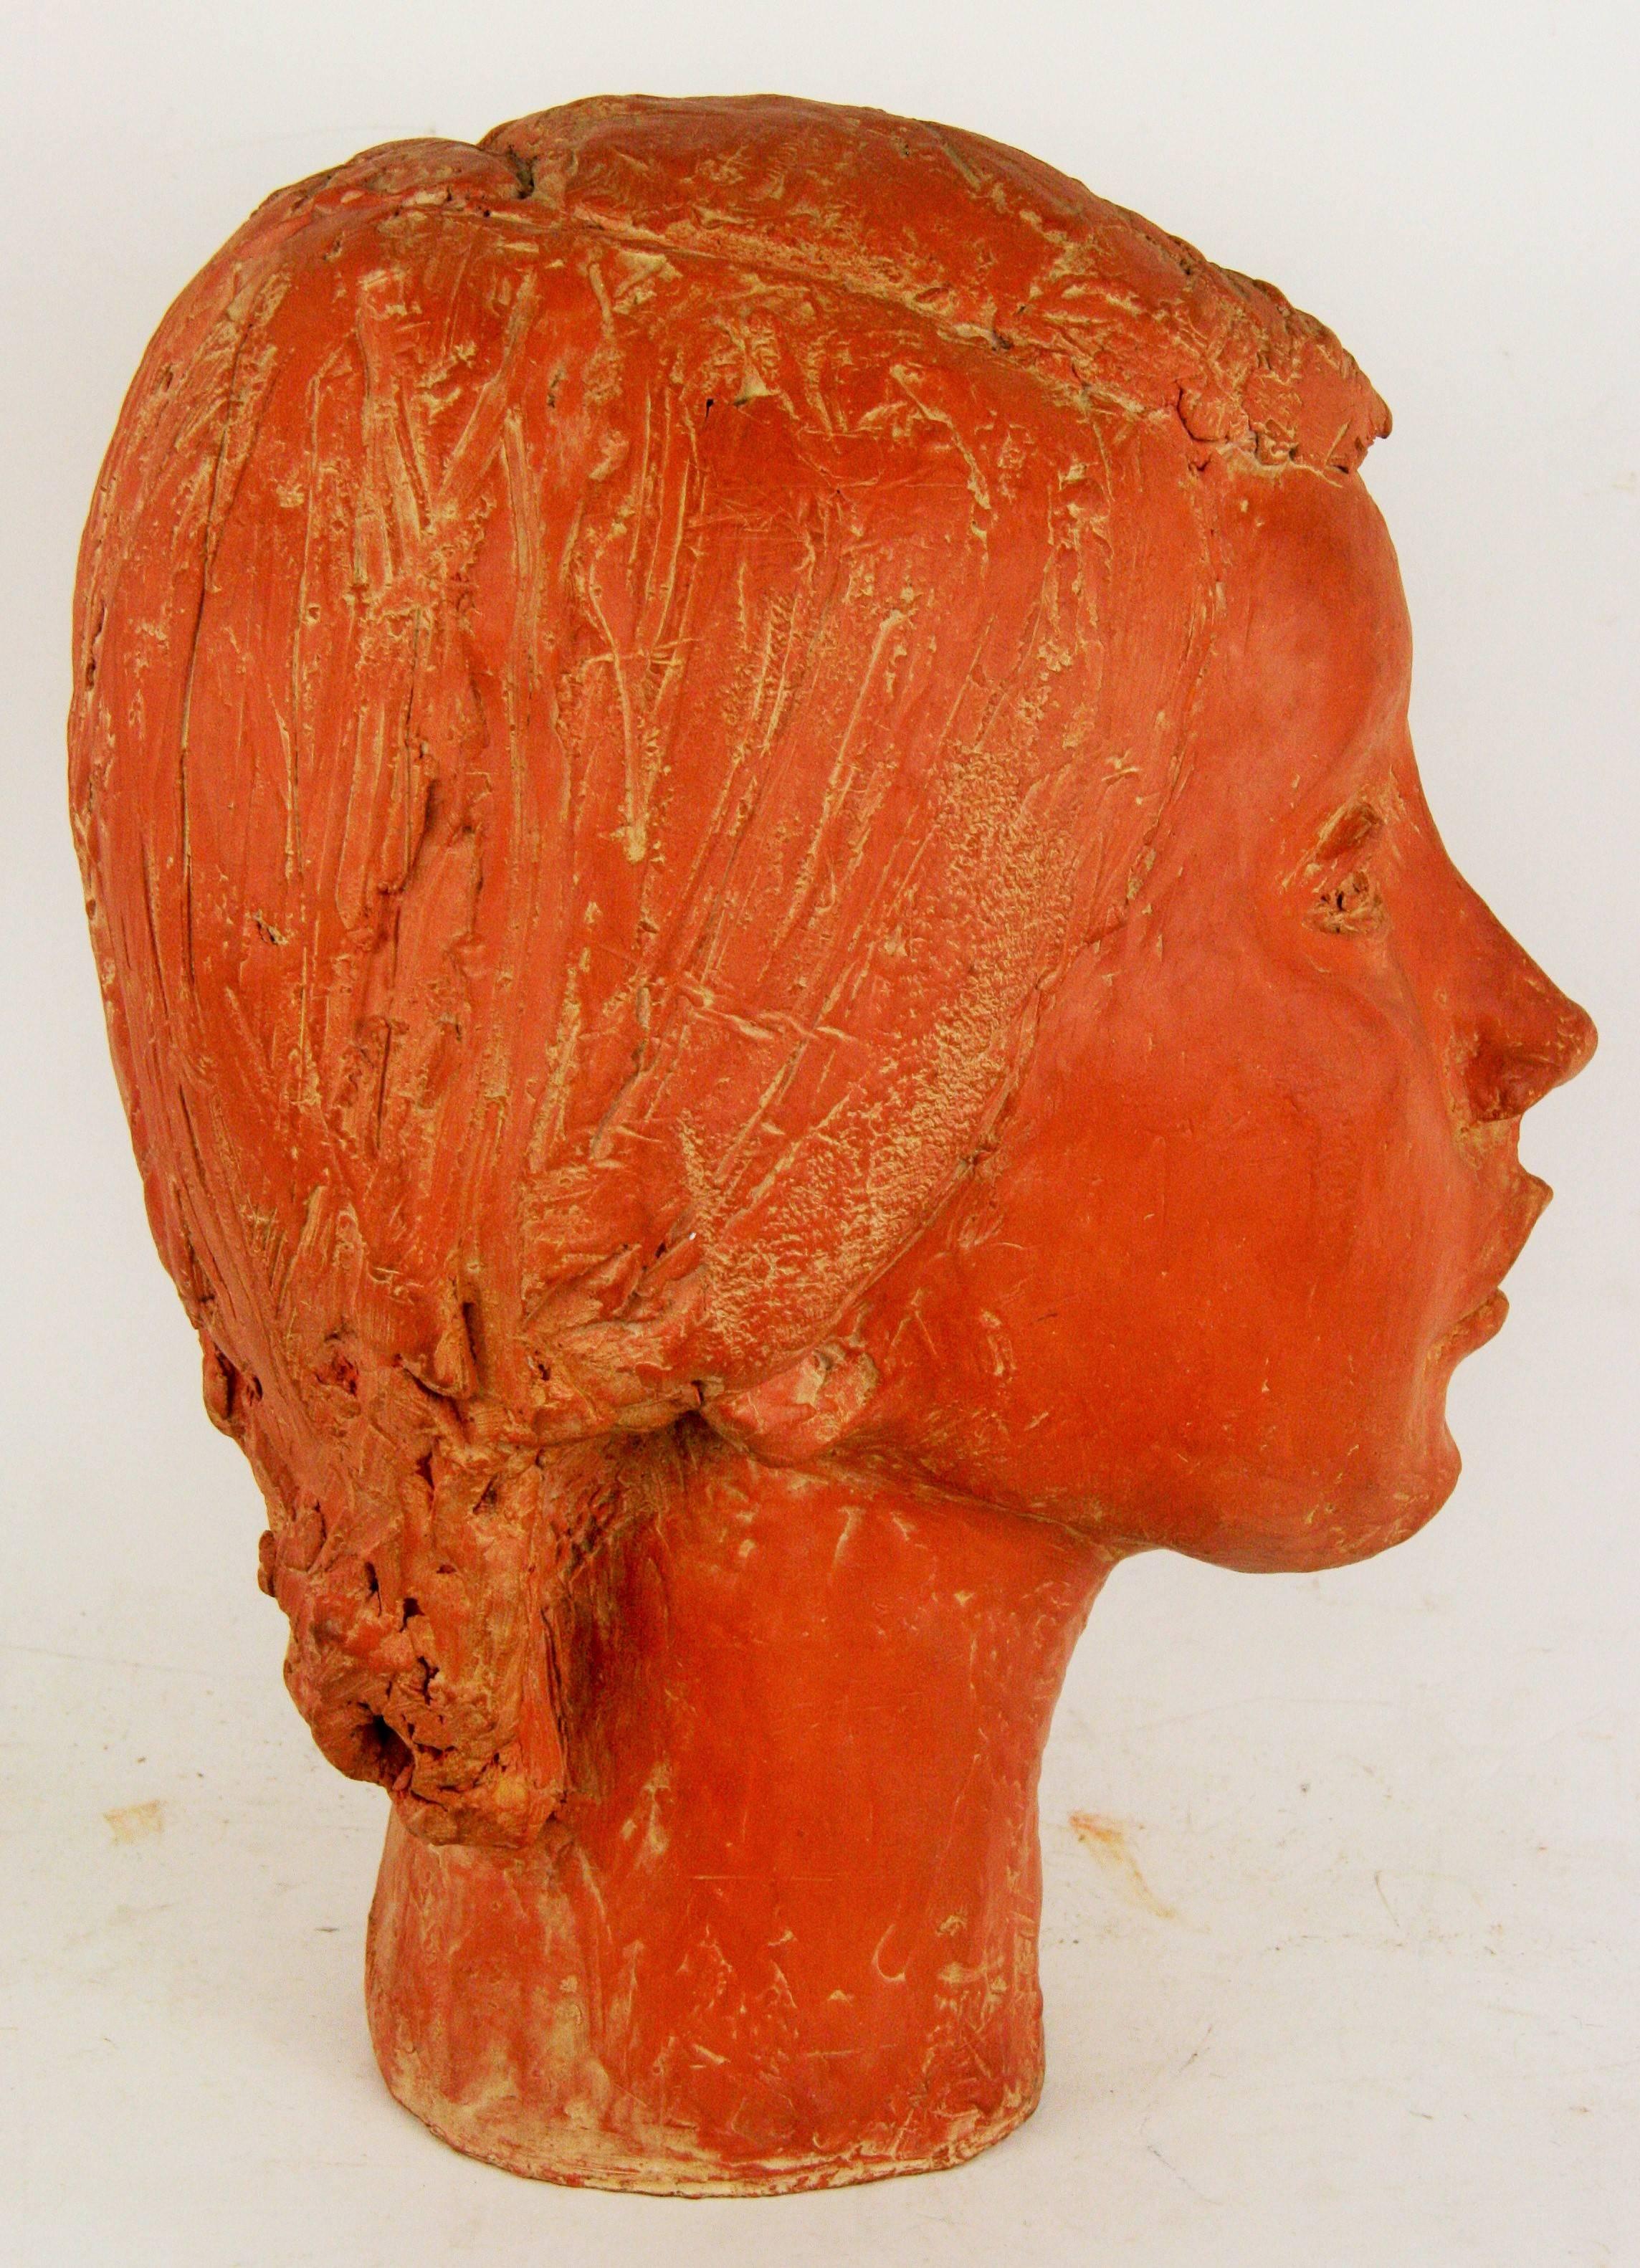 9-409, a vintage terracotta sculpture signed by Pajo.
Age wear appropriate.